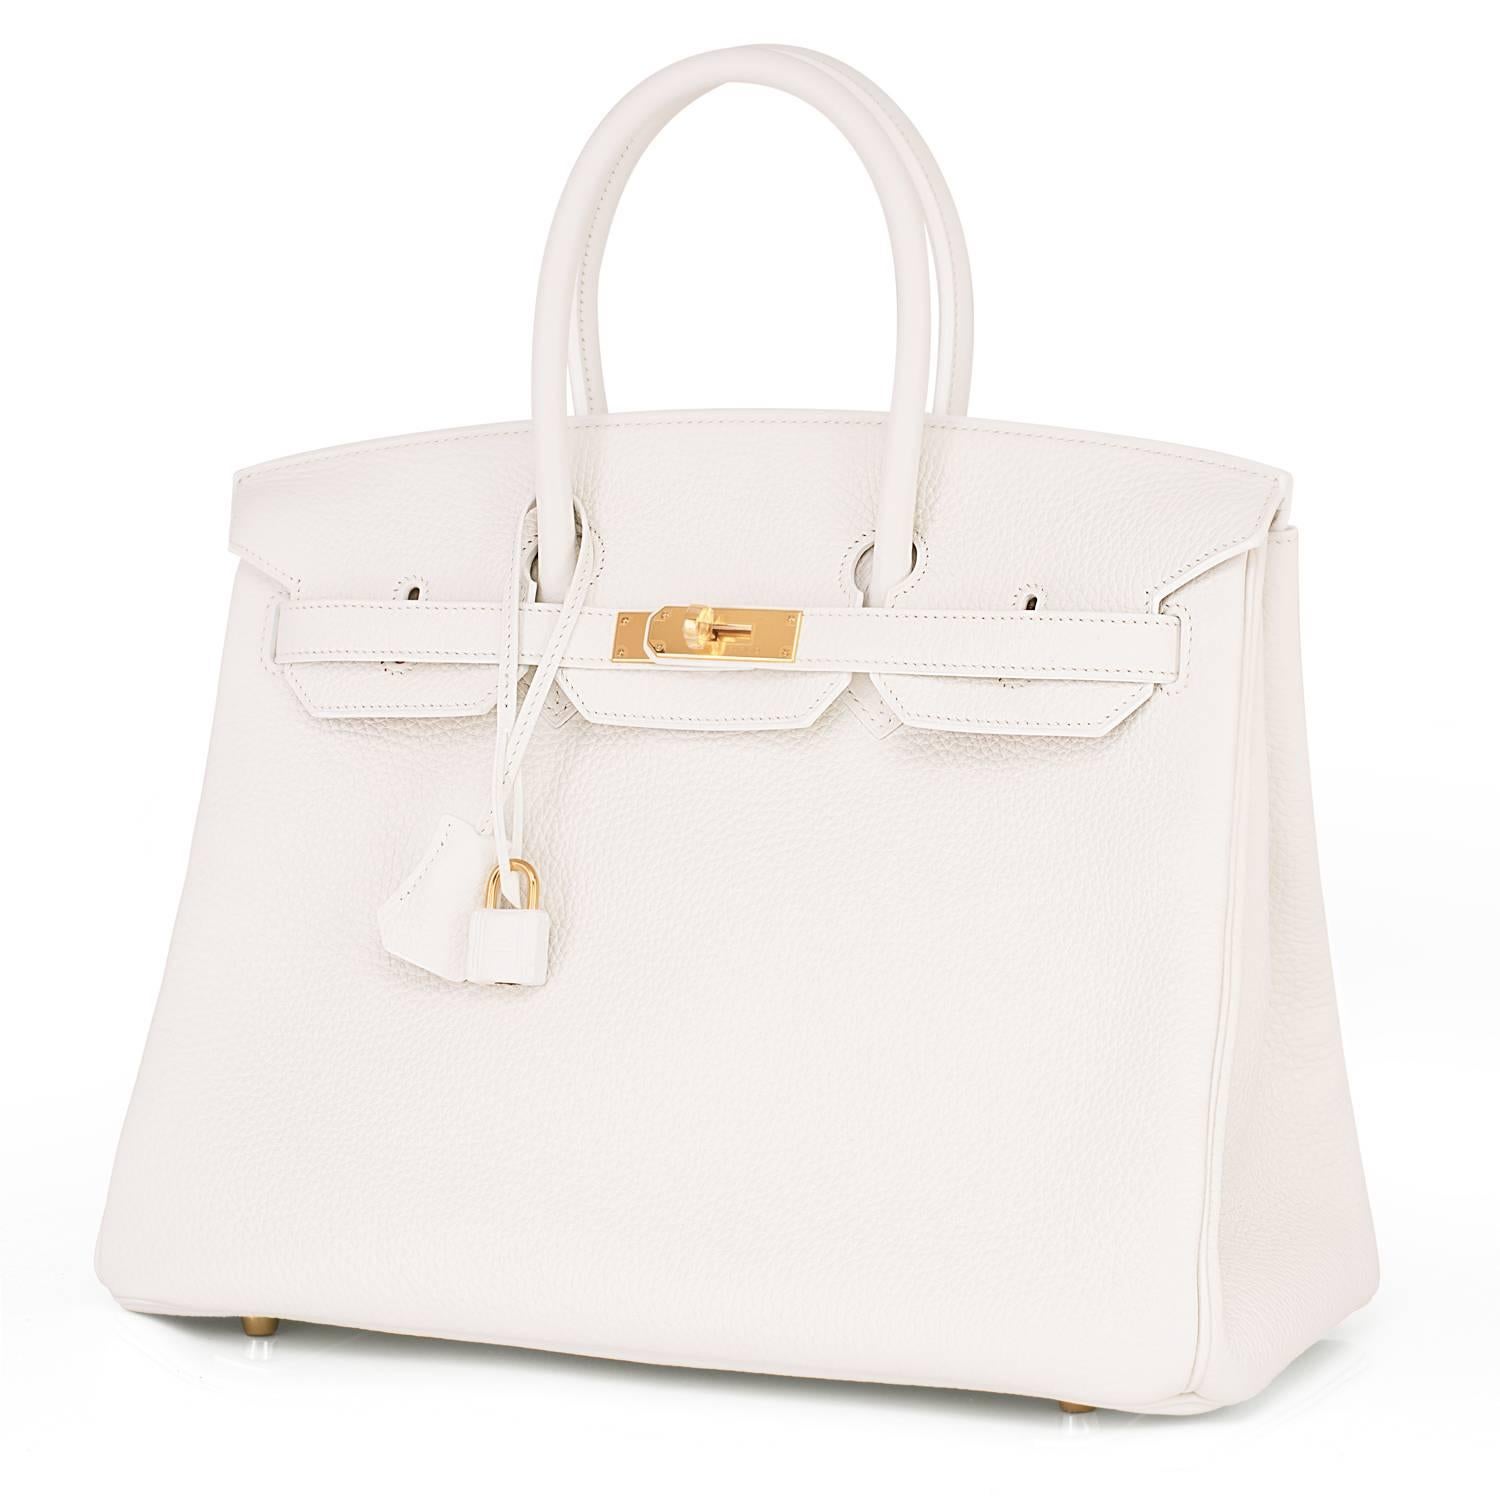 Hermes White 35cm Leather Birkin Gold Hardware New 
Store fresh. Pristine condition (with plastic on hardware). 
Perfect gift! Comes full set with keys, lock, clochette, a sleeper for the bag, rain protector, Hermes ribbon and box.
White is the